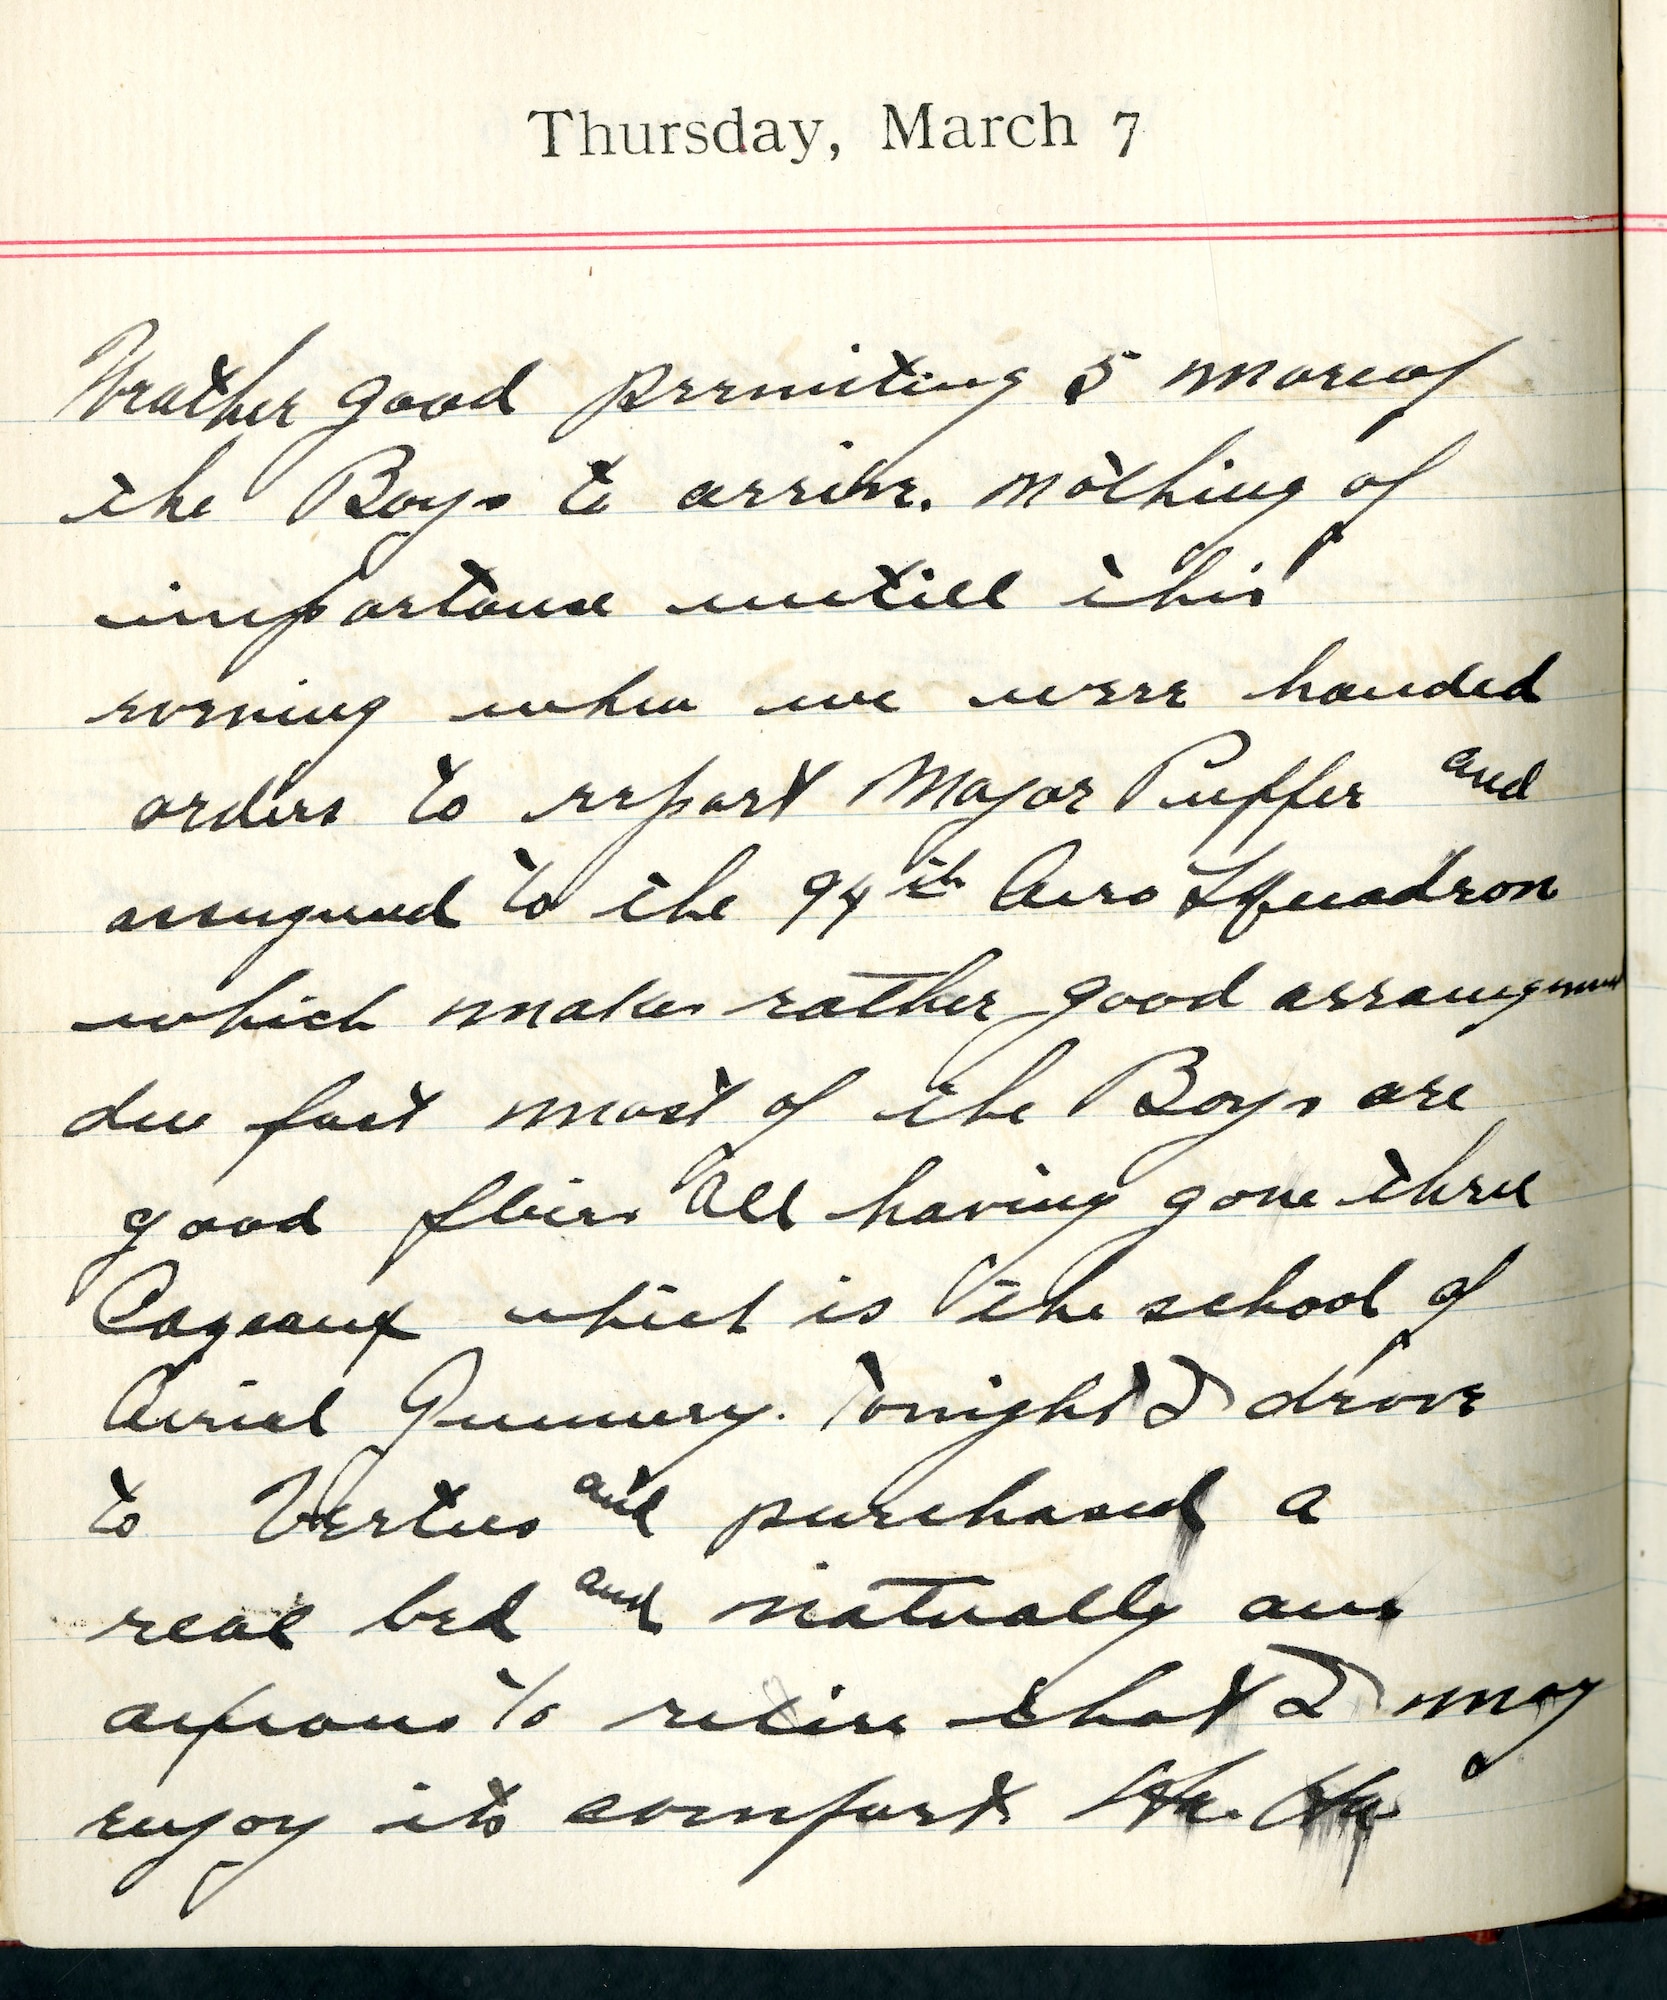 Capt. Edward V. Rickenbacker's 1918 wartime diary entry. (03/07/1918).

Weather good, permitting 5 more of the boys to arrive.  Nothing of importance until this evening when we were handed orders to report [to] Major [John W.] Huffer and assigned to the 94th Aero Squadron, which makes rather good assignment due [to the] fact most of the Boys are good fliers all having gone thru Cazeaux, which is the school of Aerial Gunnery.  Tonight I drove to Vertus and purchased a real bed and naturally am anxious to retire that I may enjoy its comfort.  Ha.  Ha.